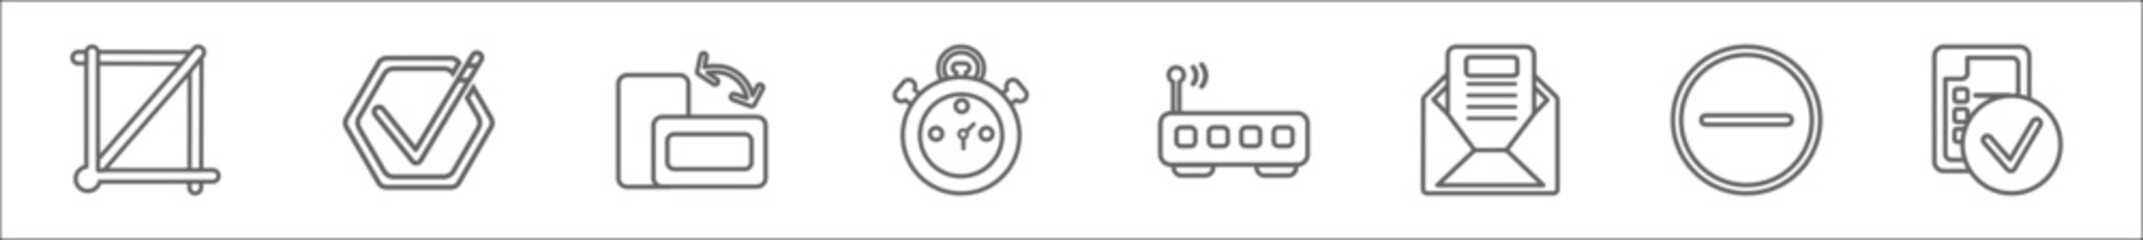 outline set of user interface line icons. linear vector icons such as crop button, tick box, switch orientation button, stopwatches, internet modem, letter envelope, rounded delete button with